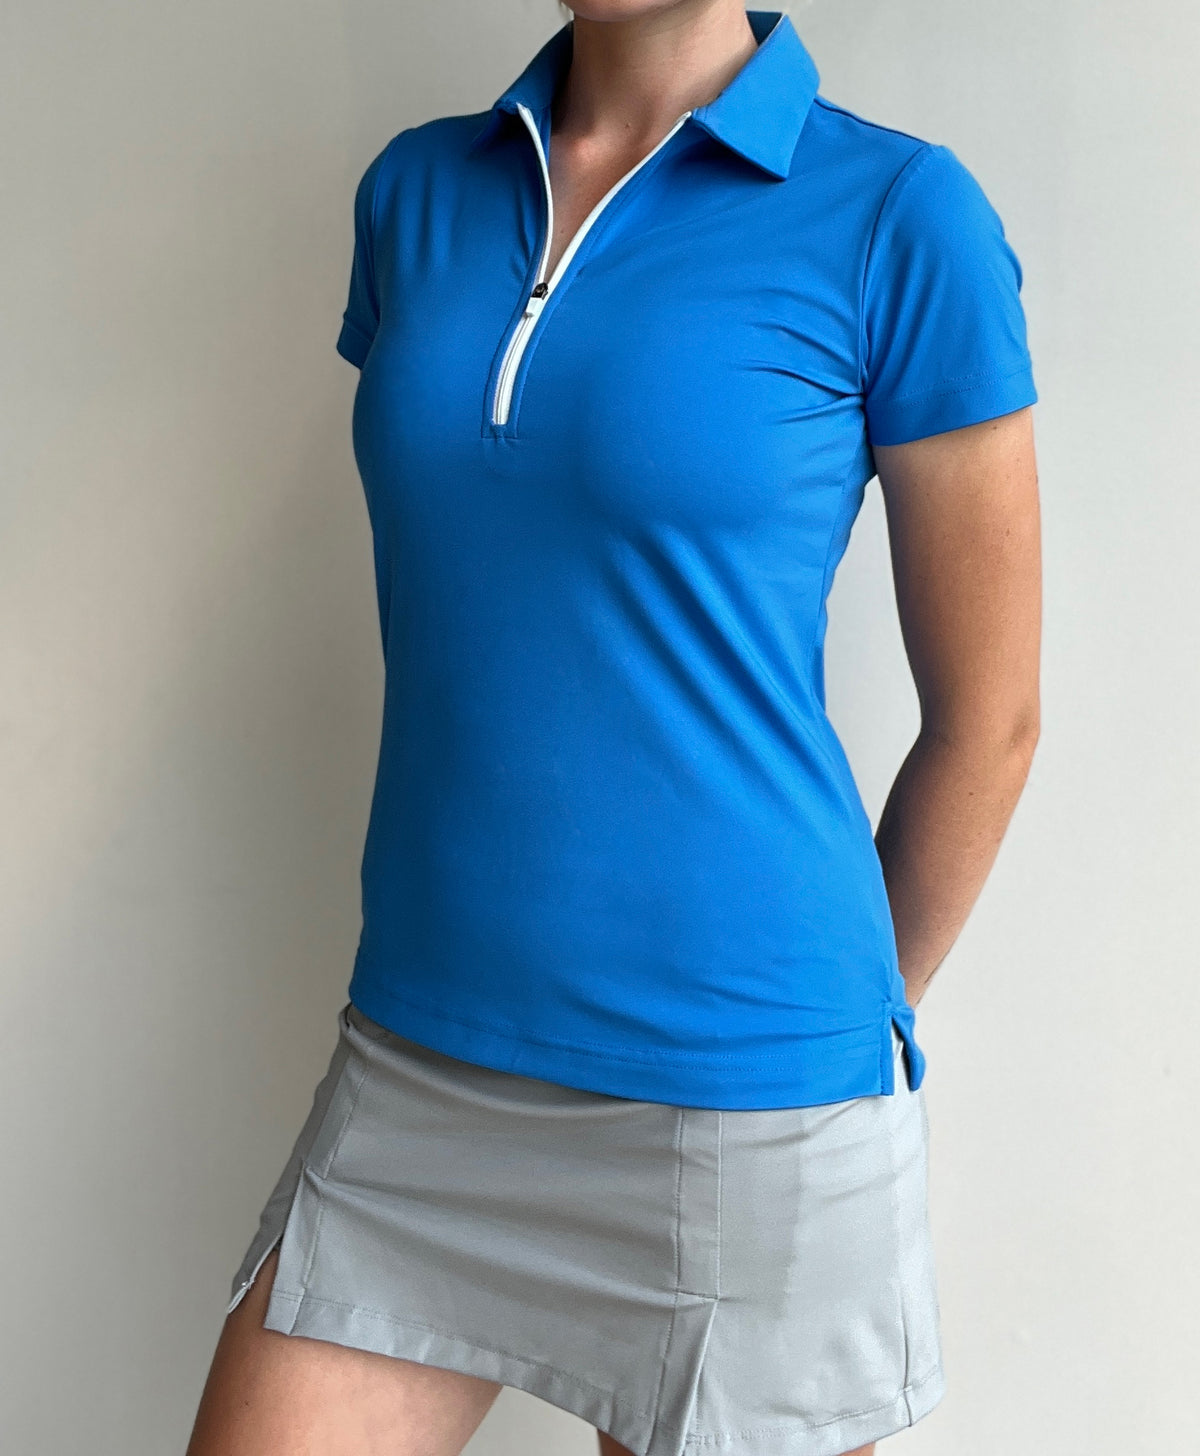 WOMEN'S BLUE POLO WITH ZIPPER AND COLLAR